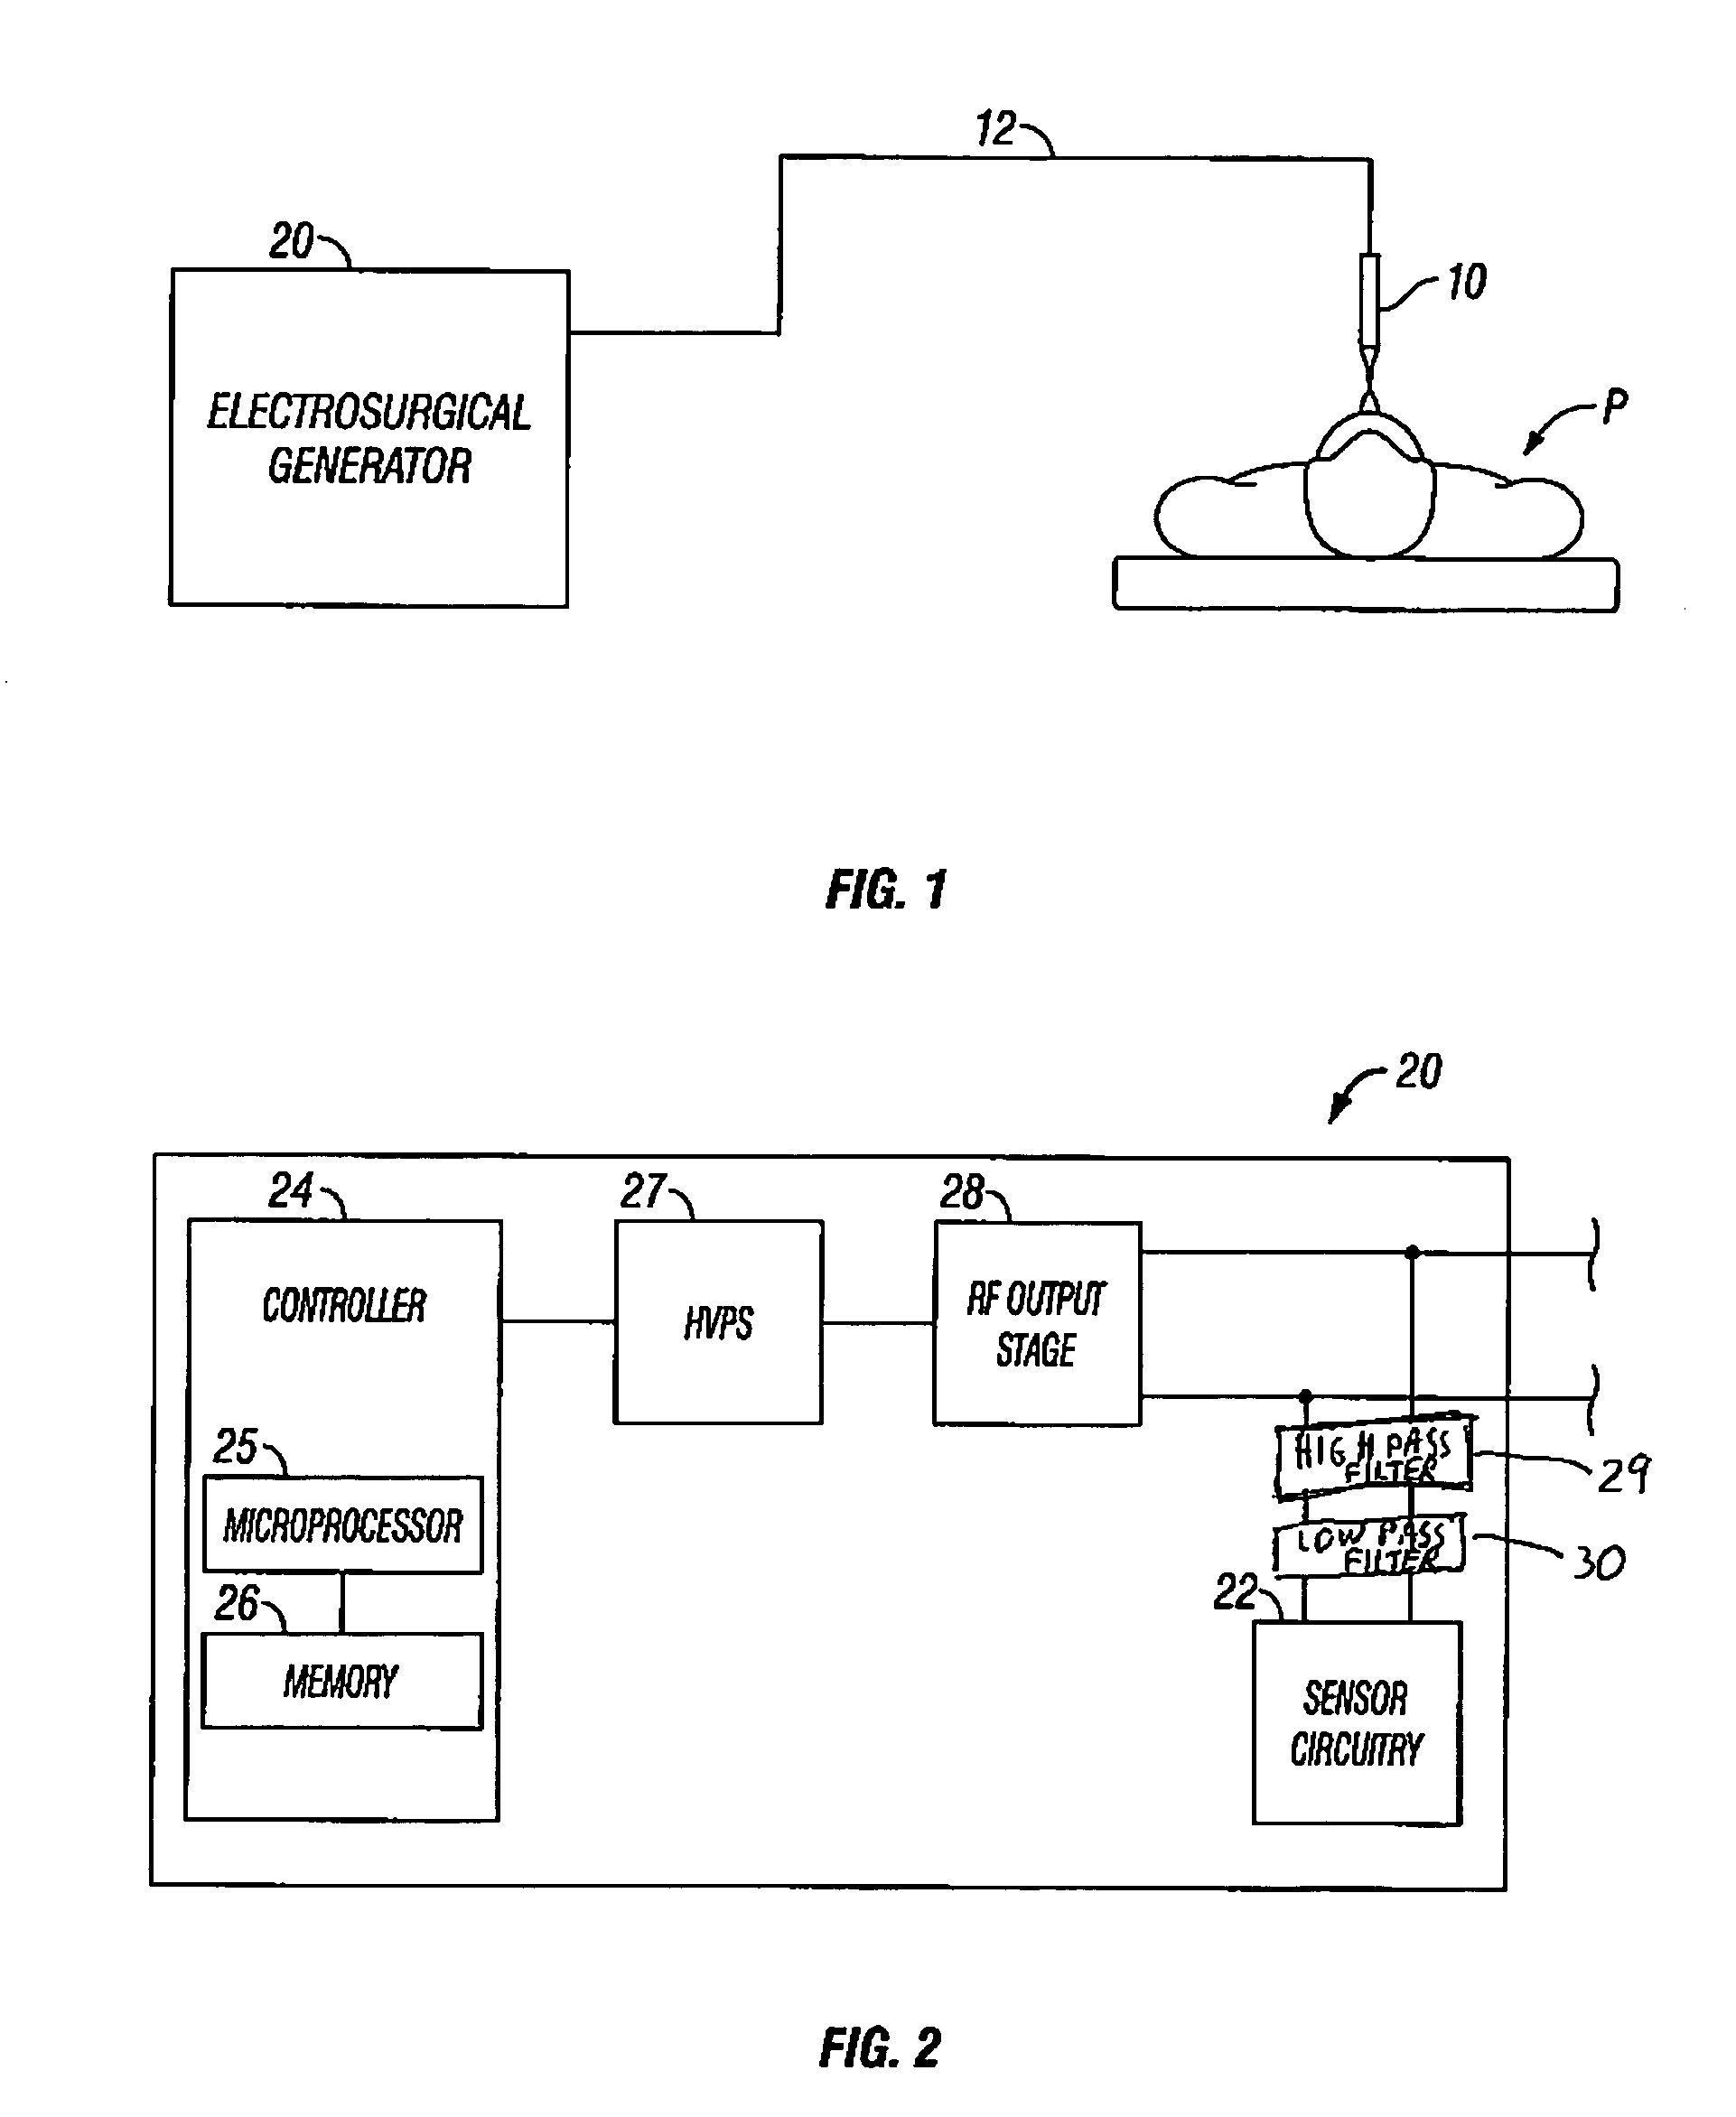 Arc based adaptive control system for an electrosurgical unit